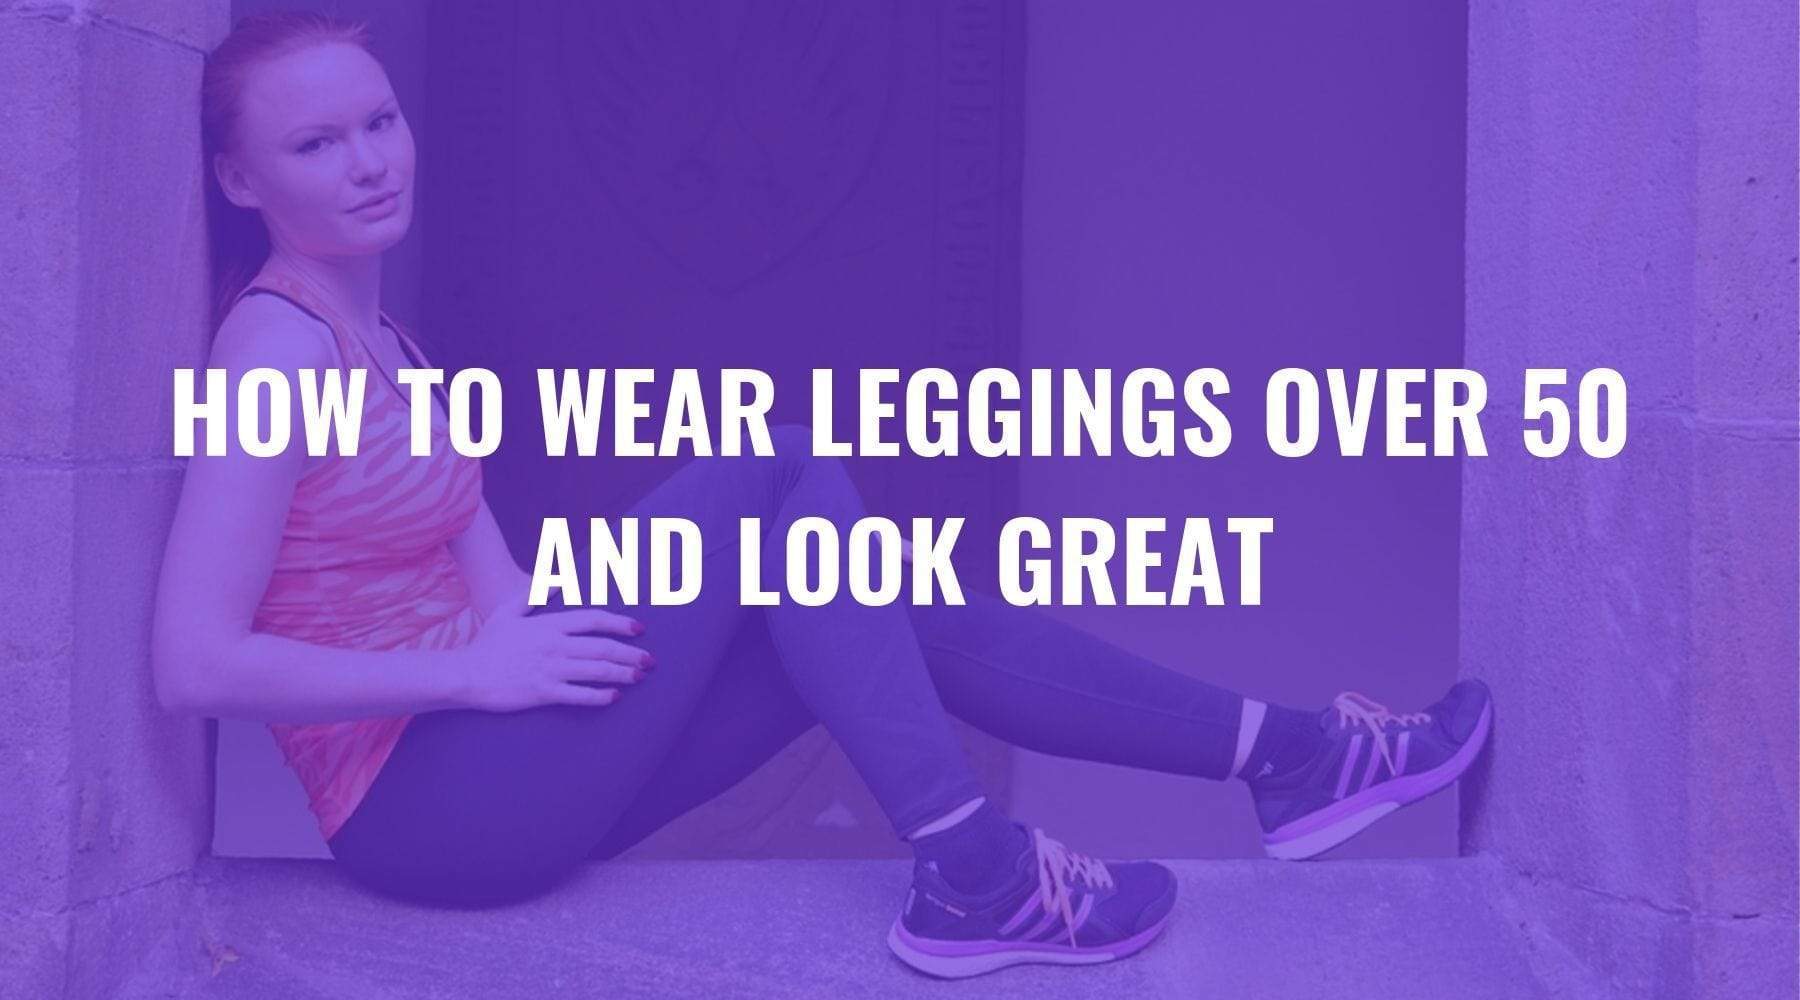 How to Wear Leggings Over 50 and Look Great